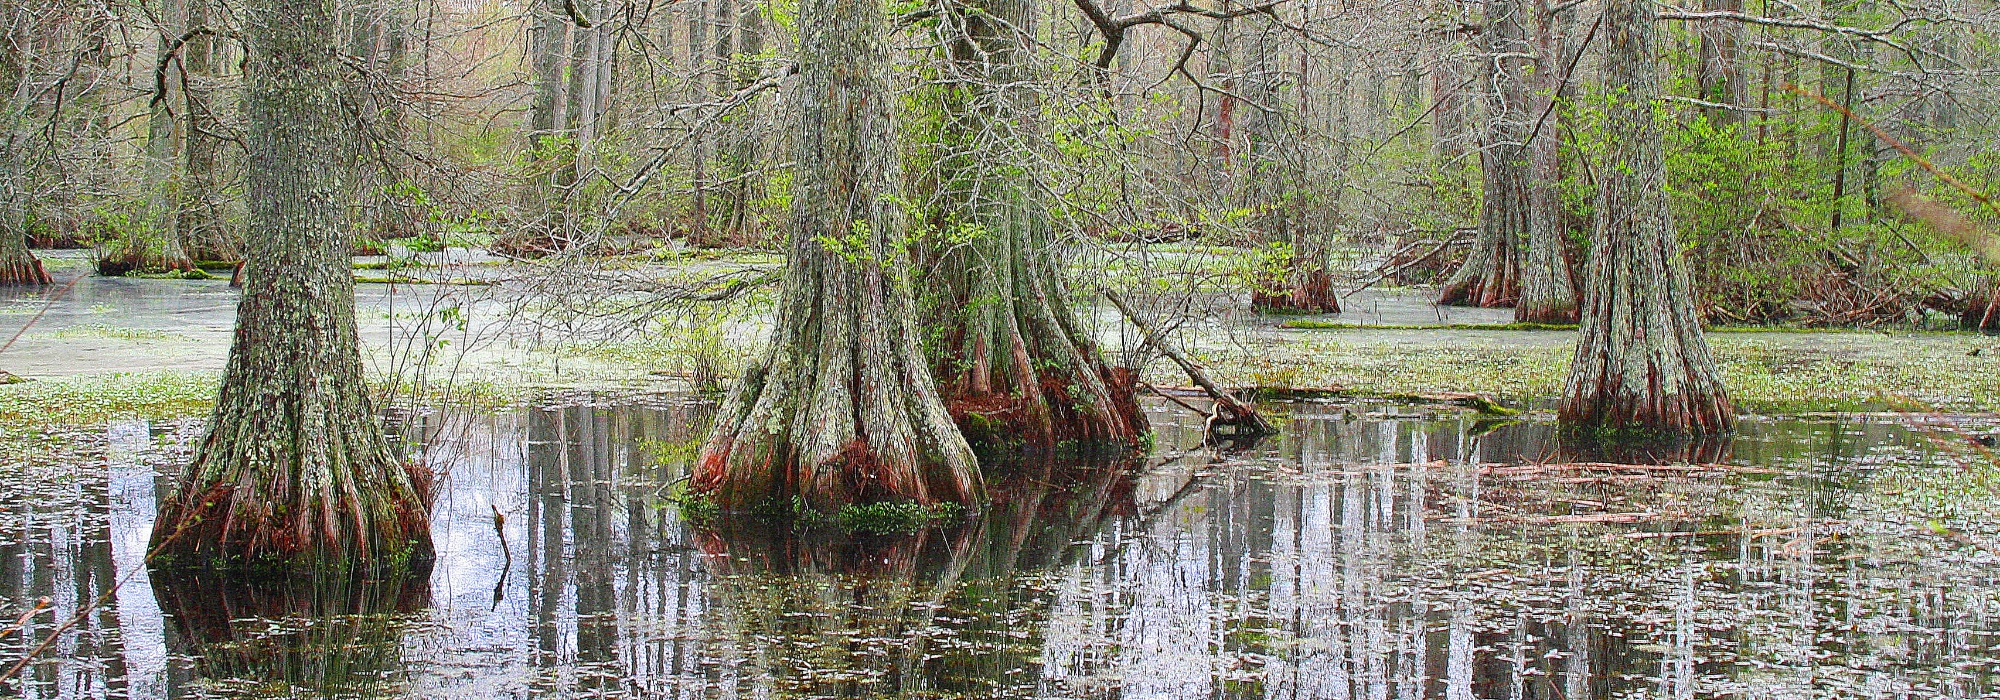 Flooded forest with cypress trees in southeastern Oklahoma.